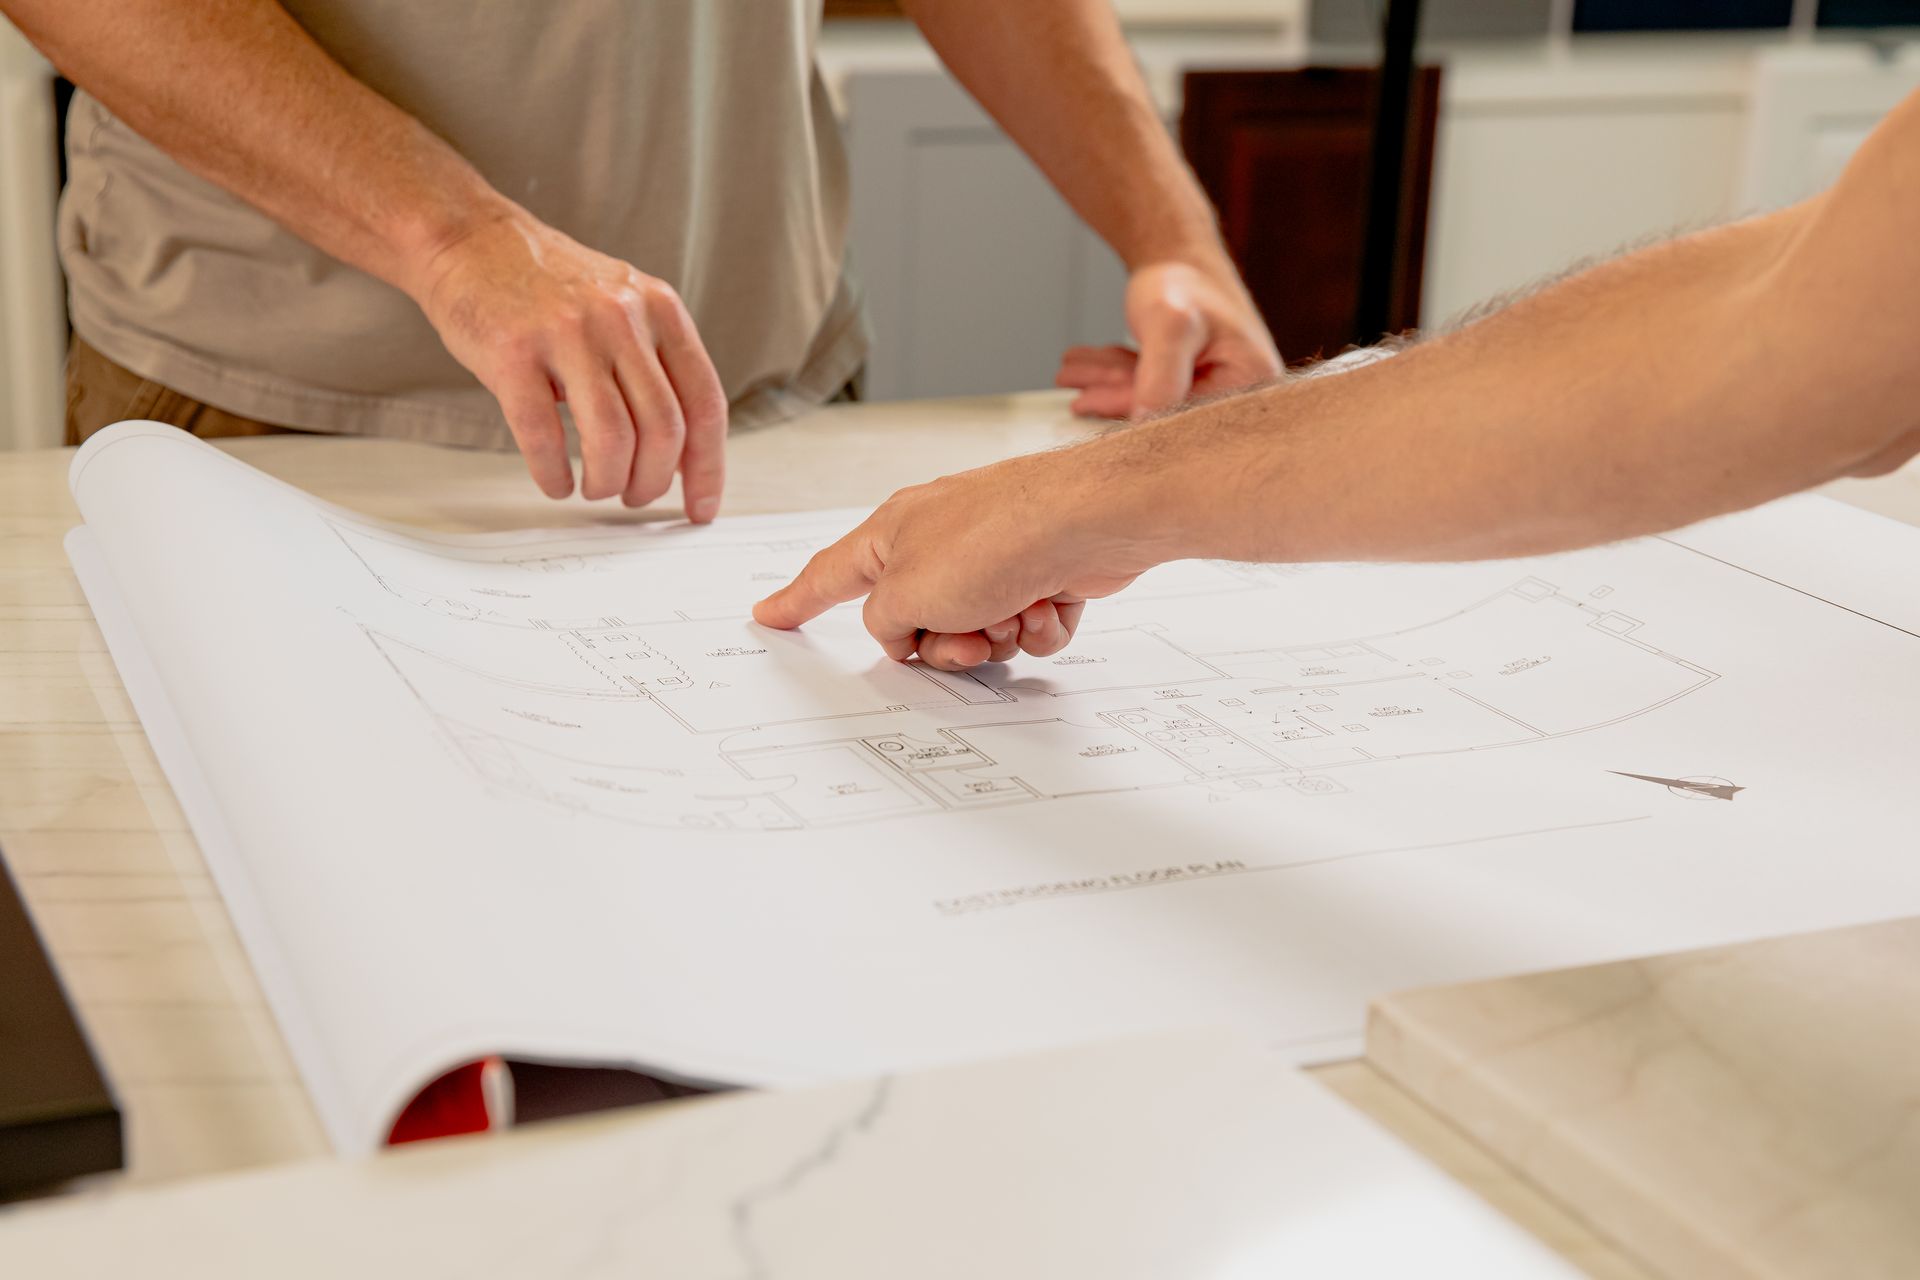 Two men are looking at a blueprint on a table.